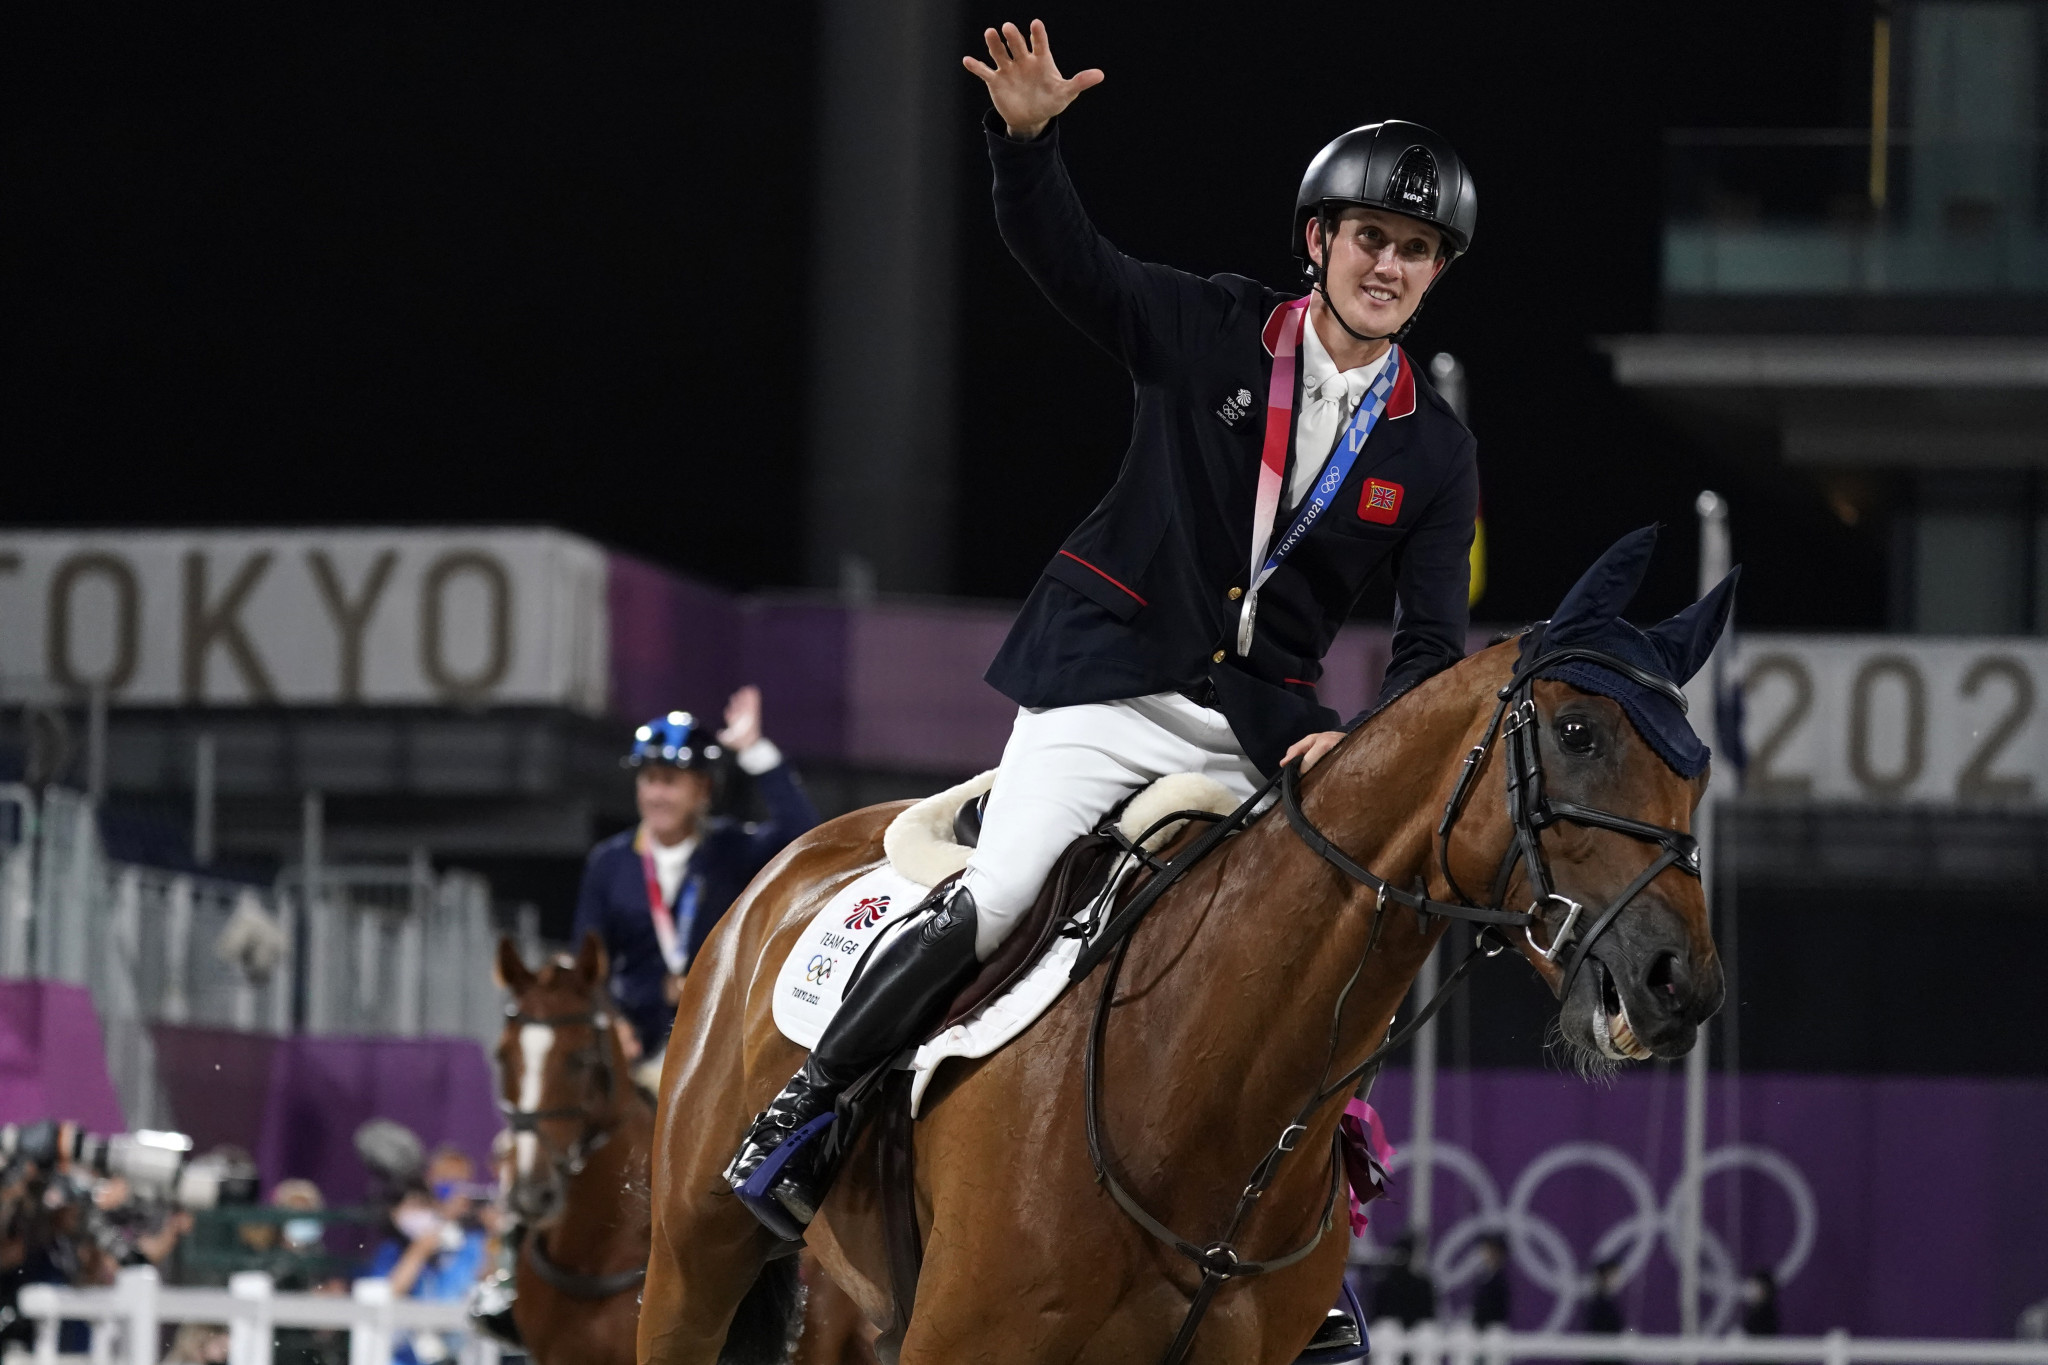 Tom McEwen claimed a silver medal in the individual eventing at the Tokyo 2020 Olympic Games ©Getty Images